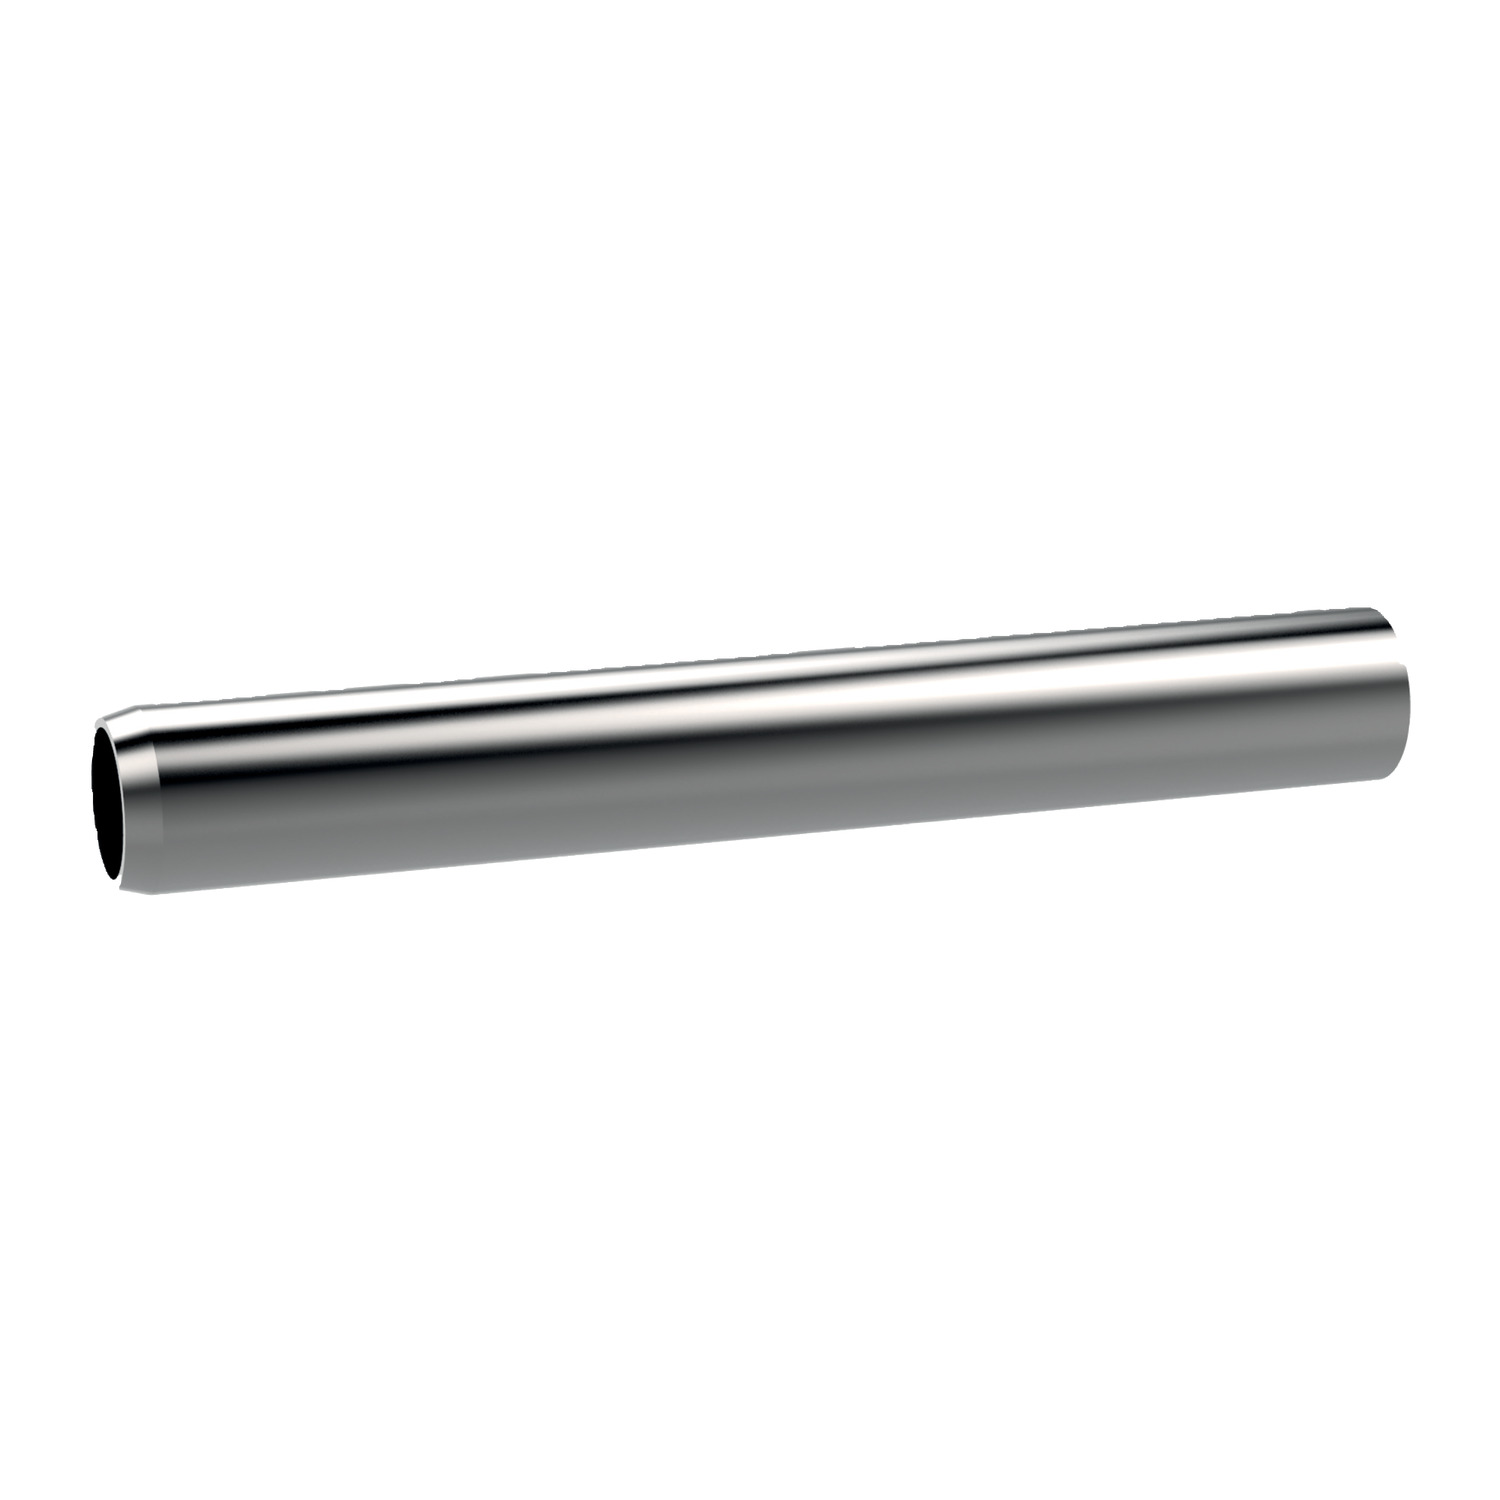 Product 46070.4, Lever Arm Tube - Long for modular toggle clamps / 